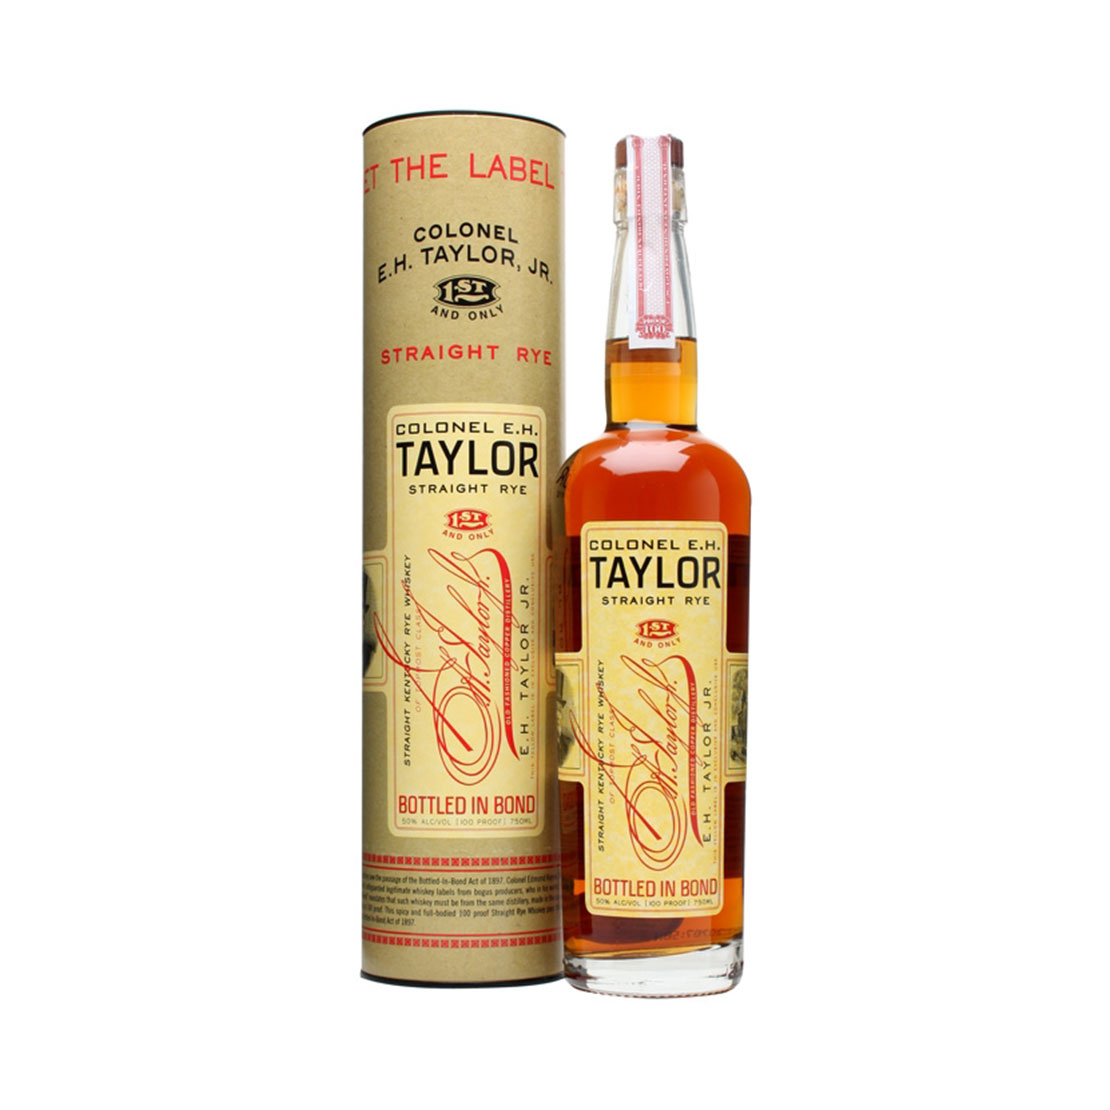 Colonel E.H. Taylor Straight Rye Whisky 750ml